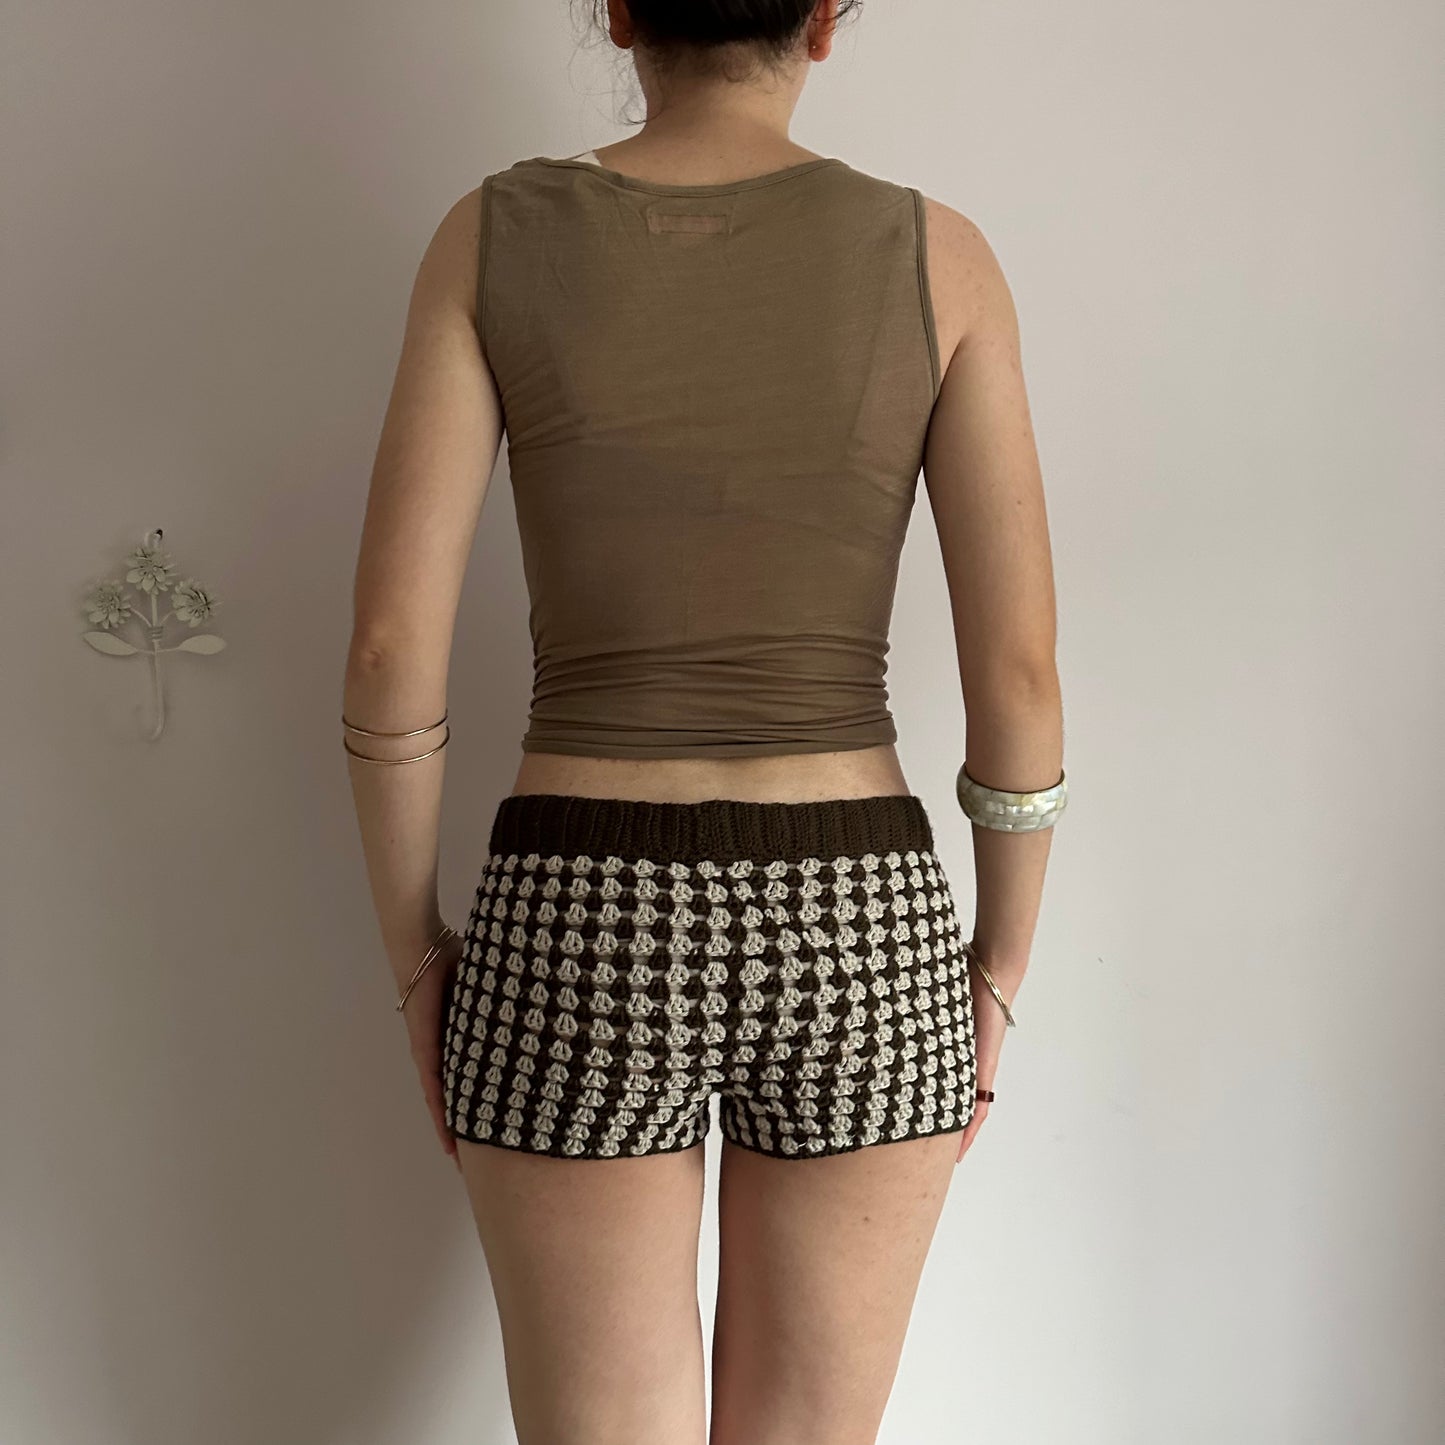 Handmade gingham crochet shorts in brown and beige